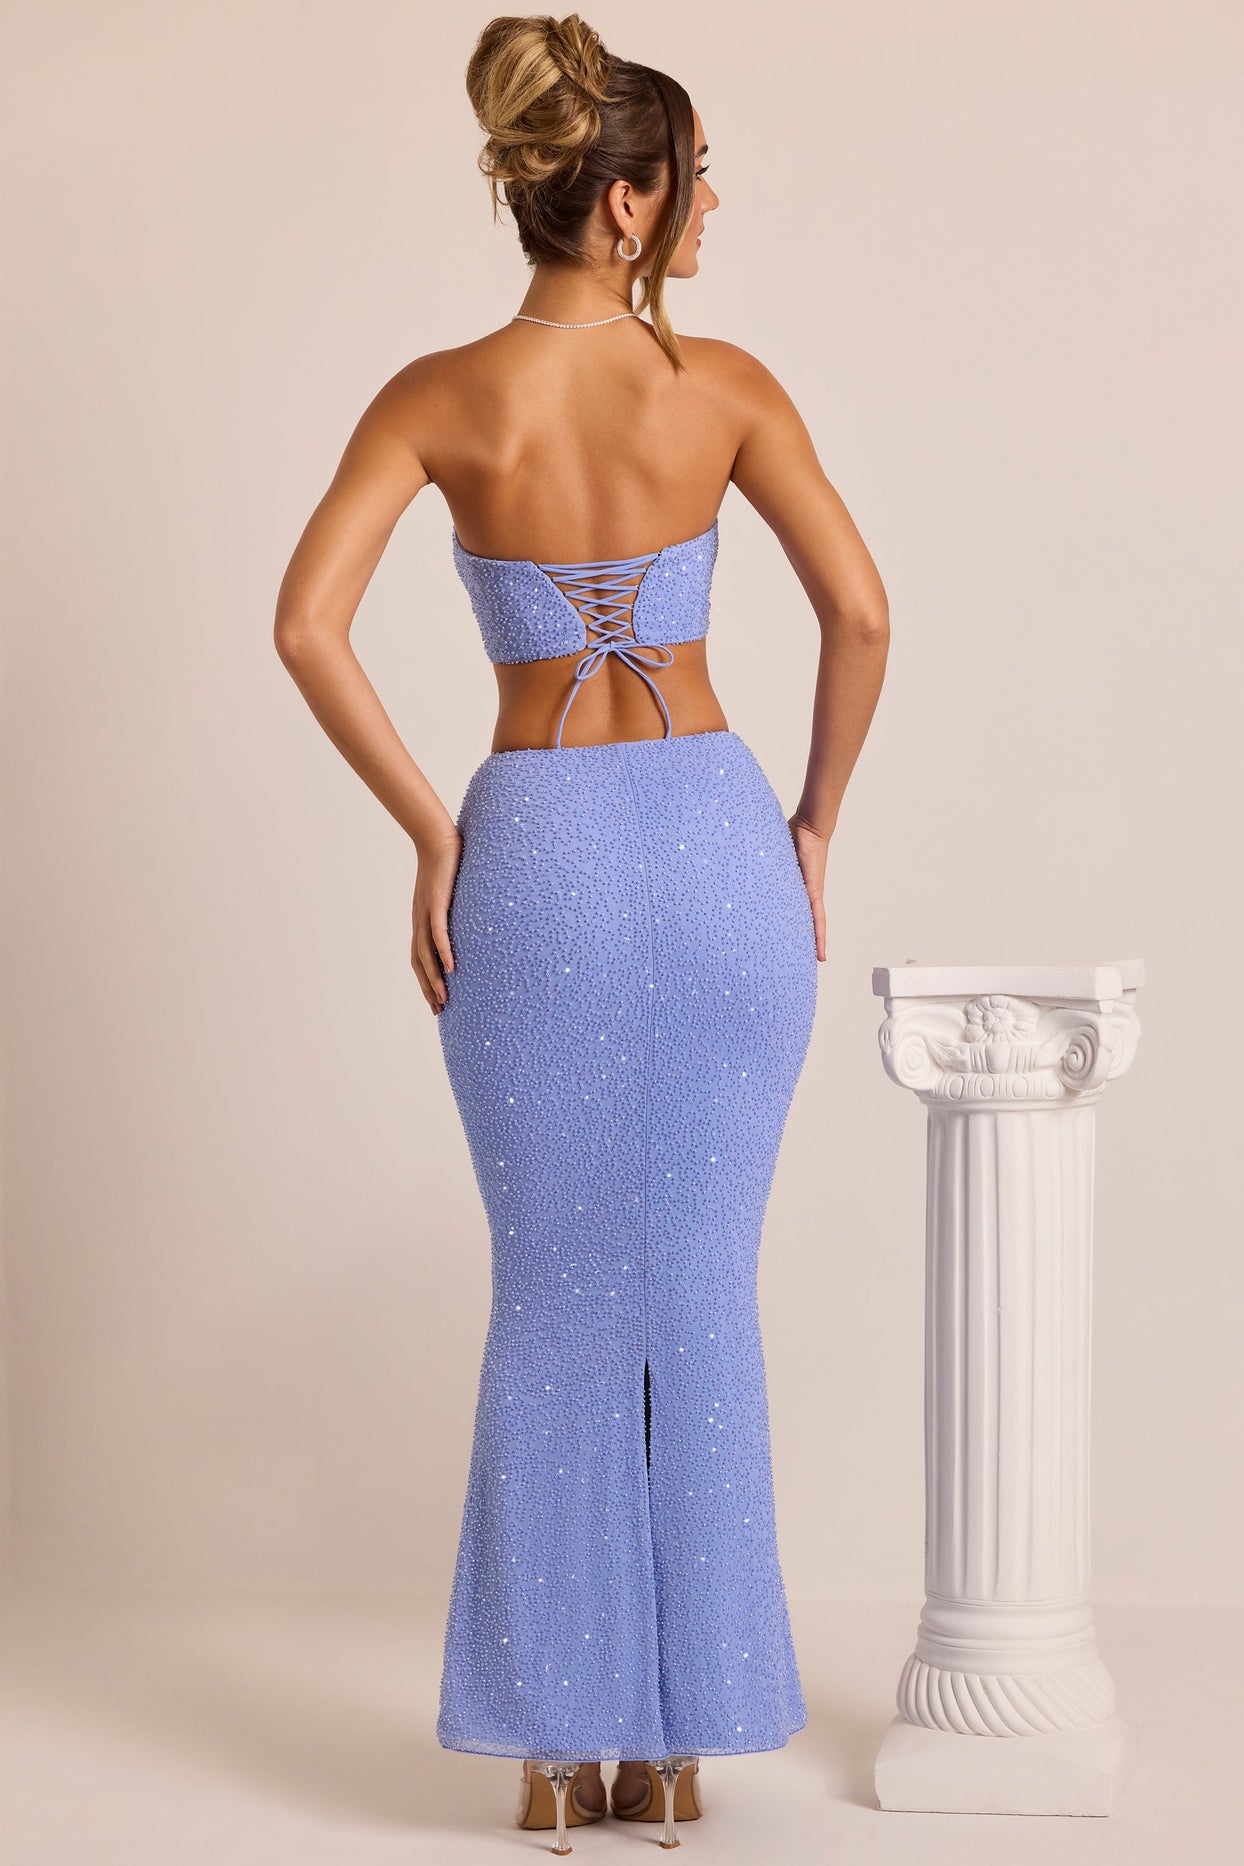 Embellished Strapless Corset Top in Powder Blue